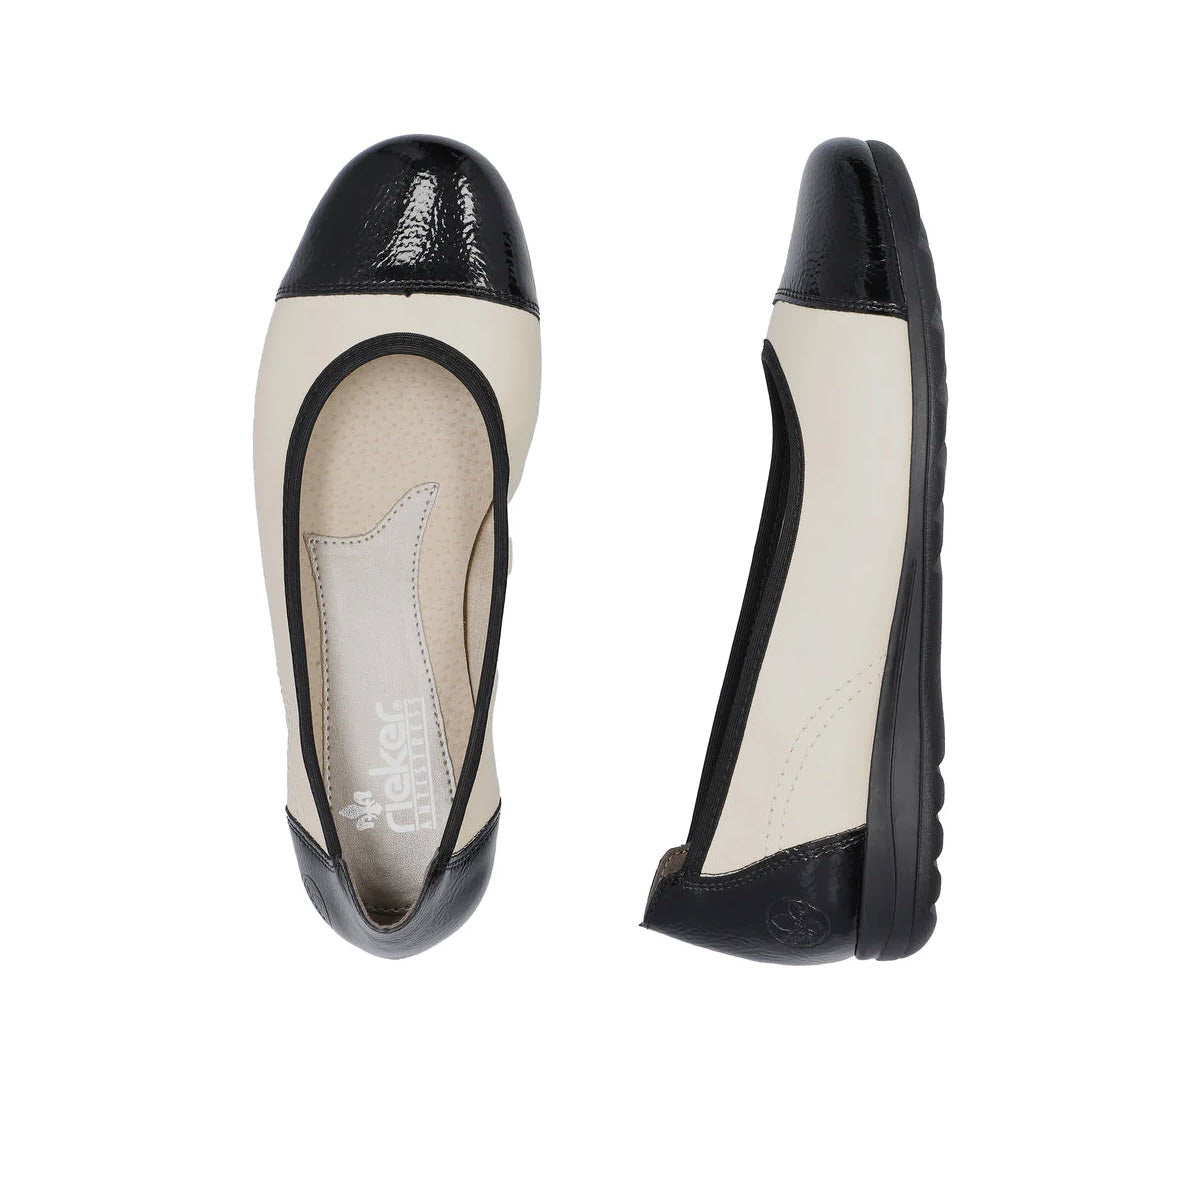 A pair of Rieker women&#39;s two-toned leather ballet pumps displayed from top and side views, featuring black and beige colors with a patent toe cap.